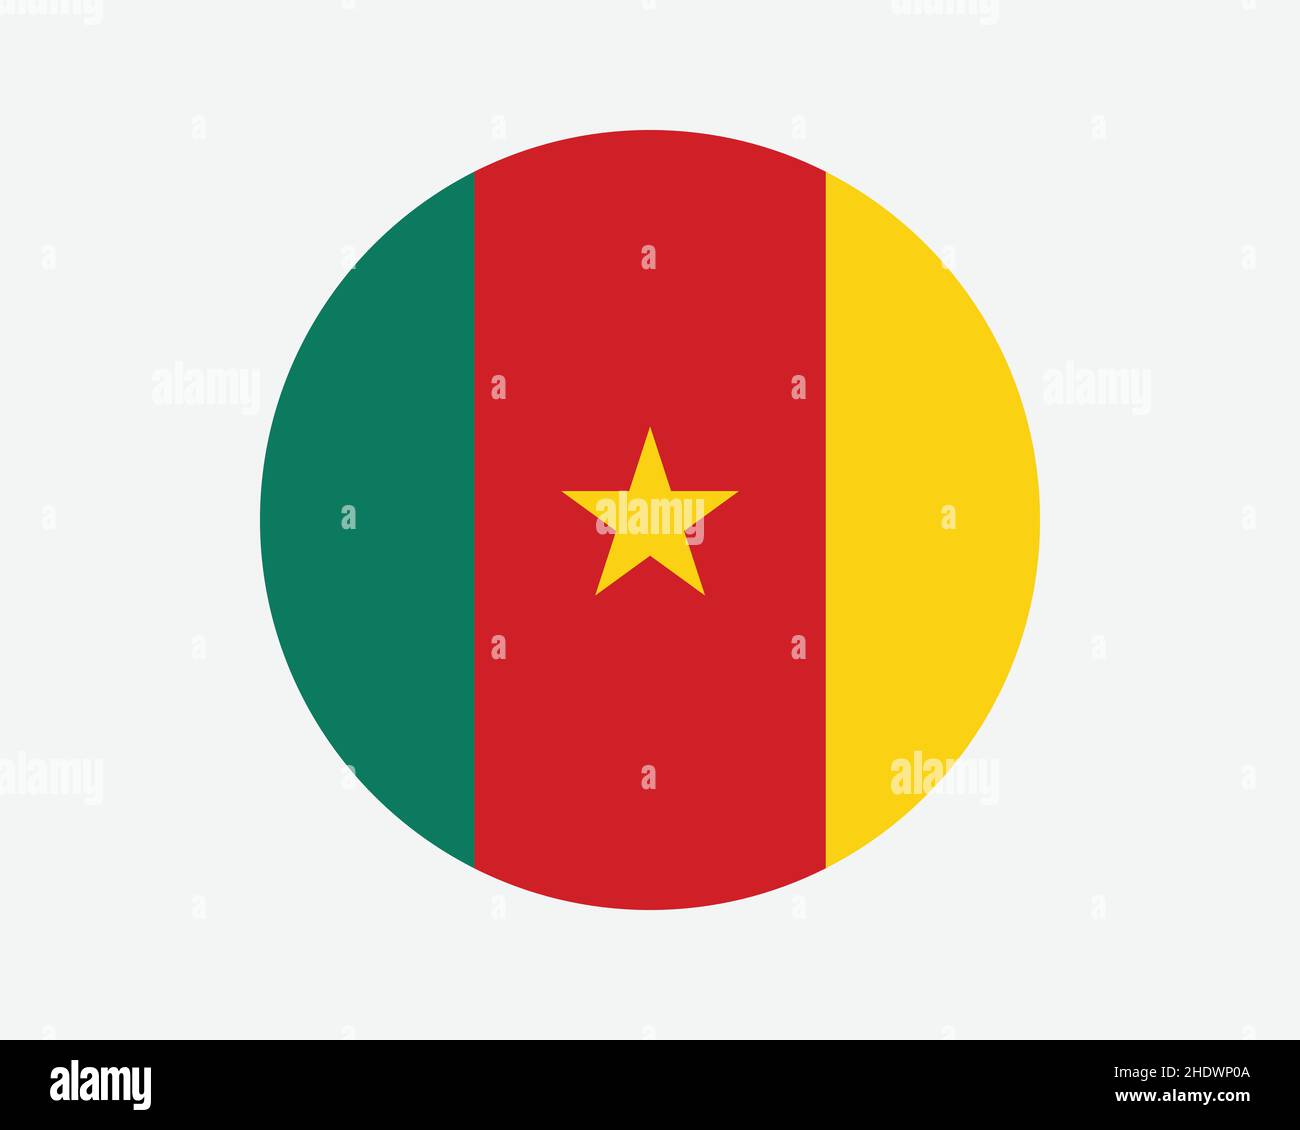 Cameroon Round Country Flag. Circular Cameroonian National Flag. Republic of Cameroon Circle Shape Button Banner. EPS Vector Illustration. Stock Vector